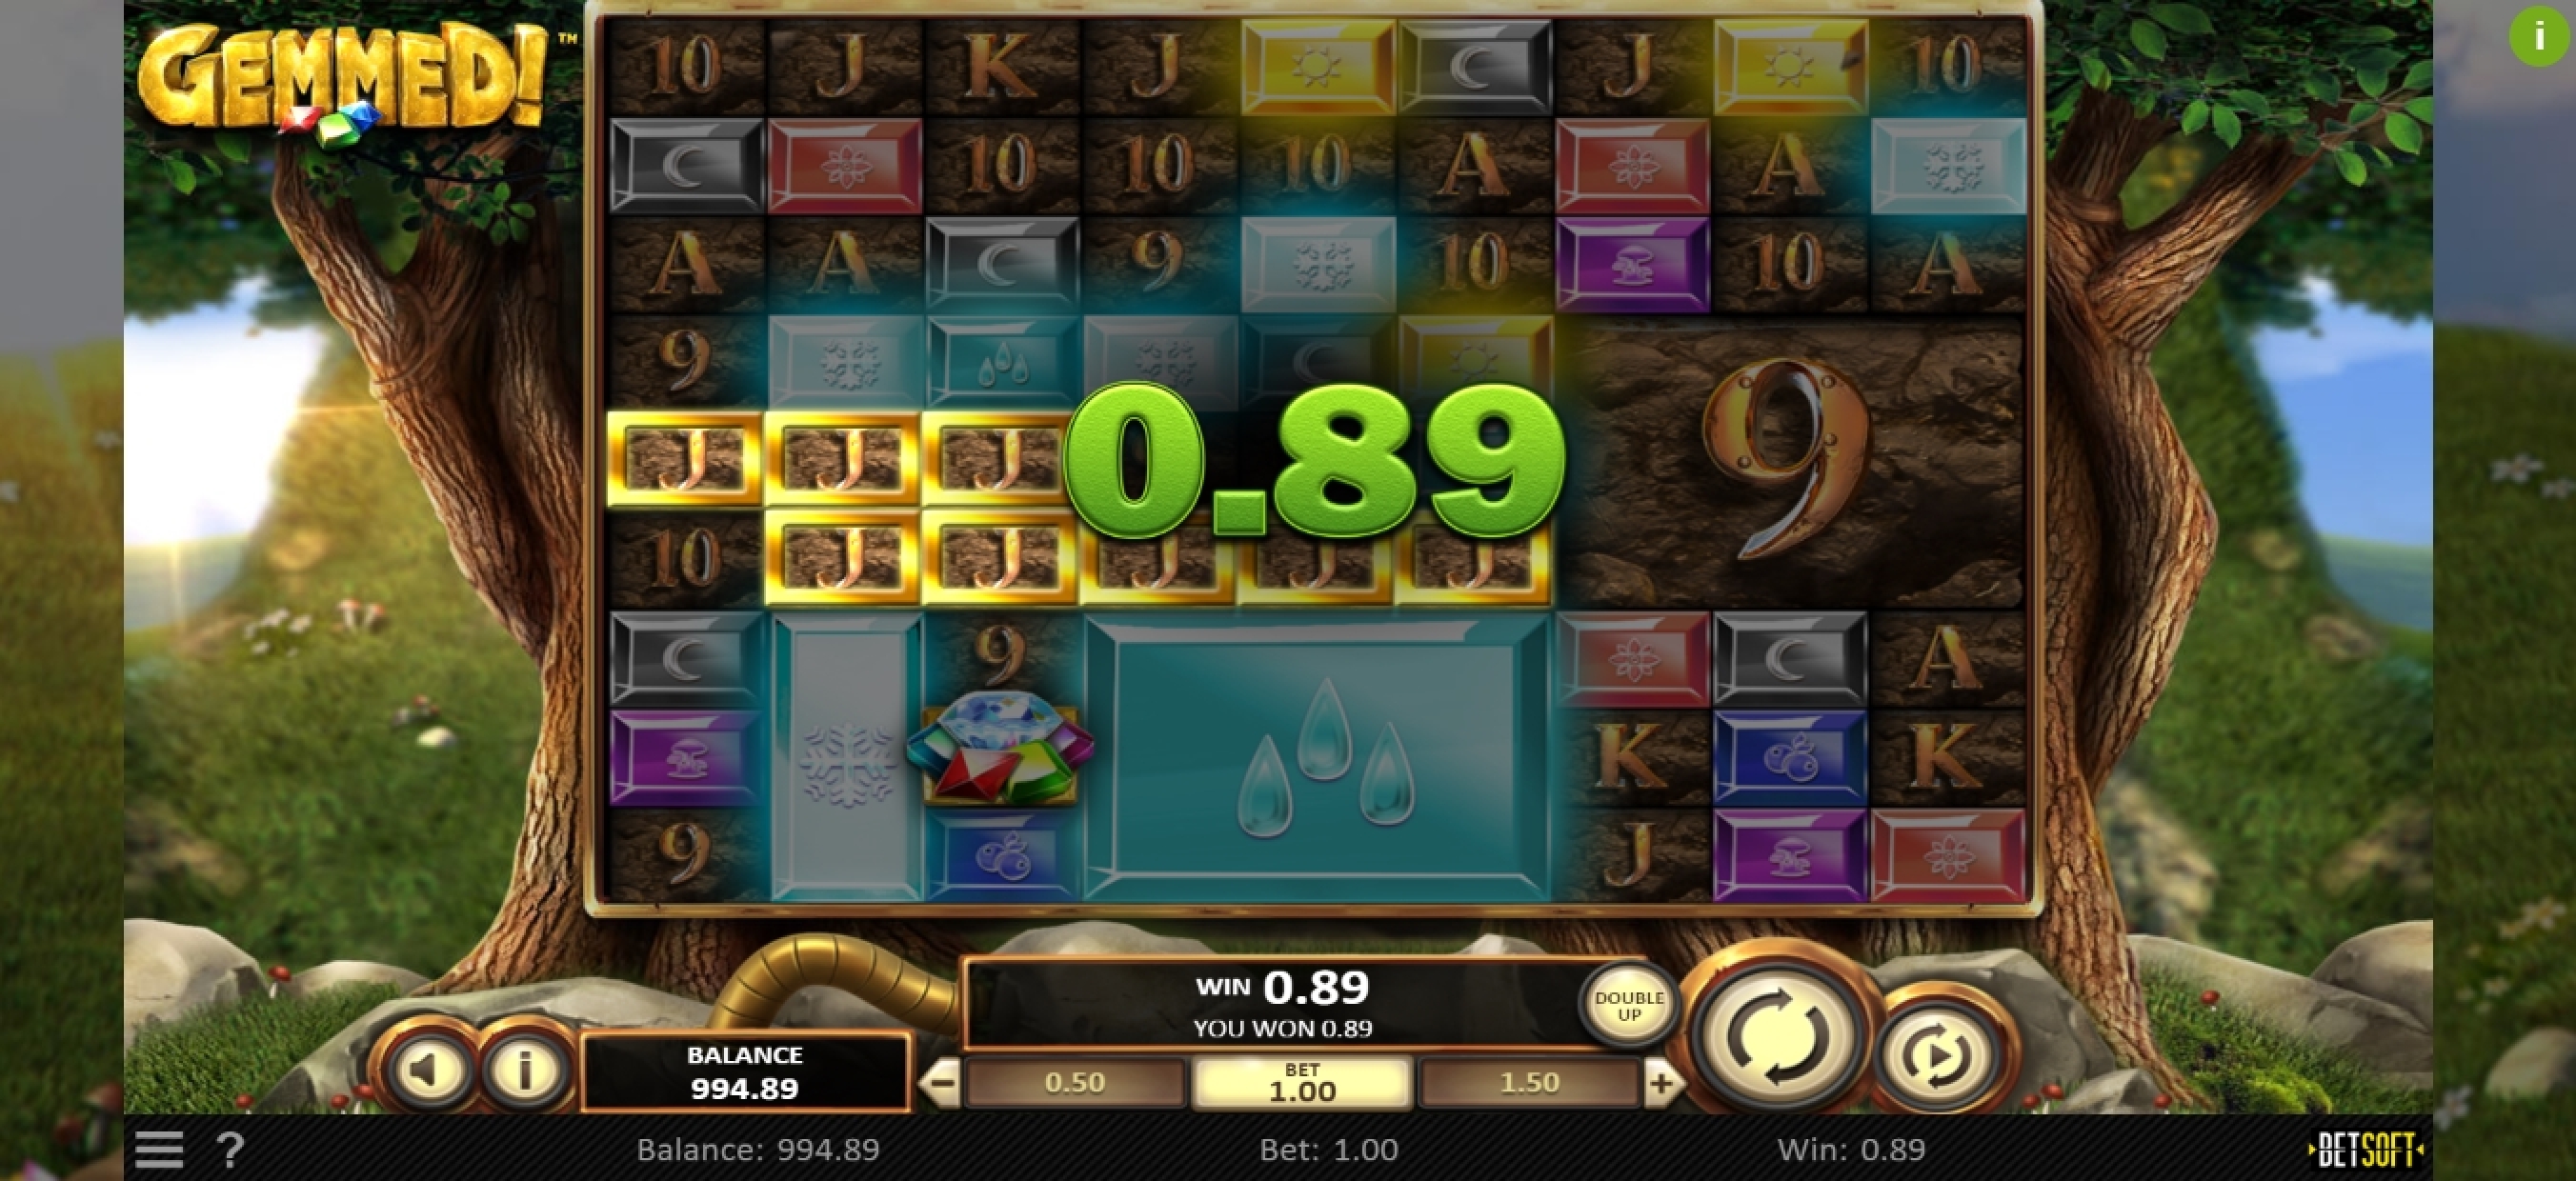 Win Money in Gemmed! Free Slot Game by Betsoft